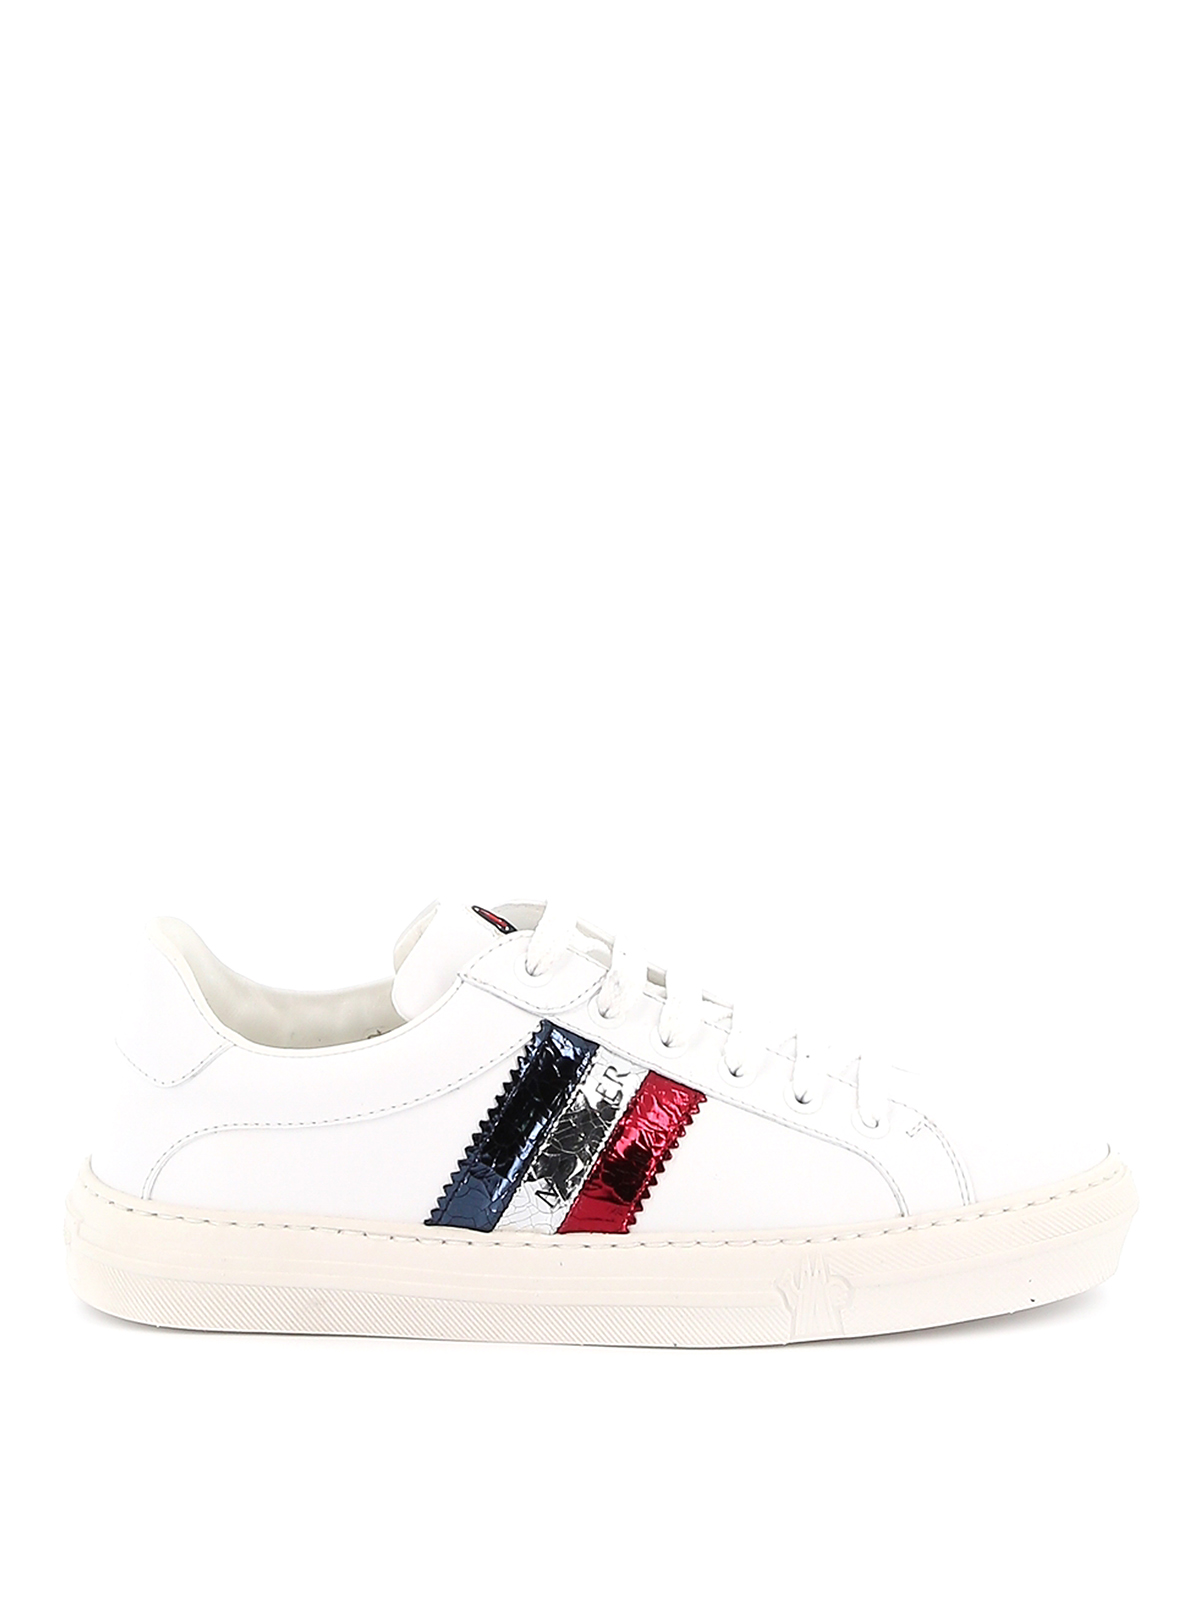 Trainers Moncler - Ariel leather sneakers - E209A205860001ALG002